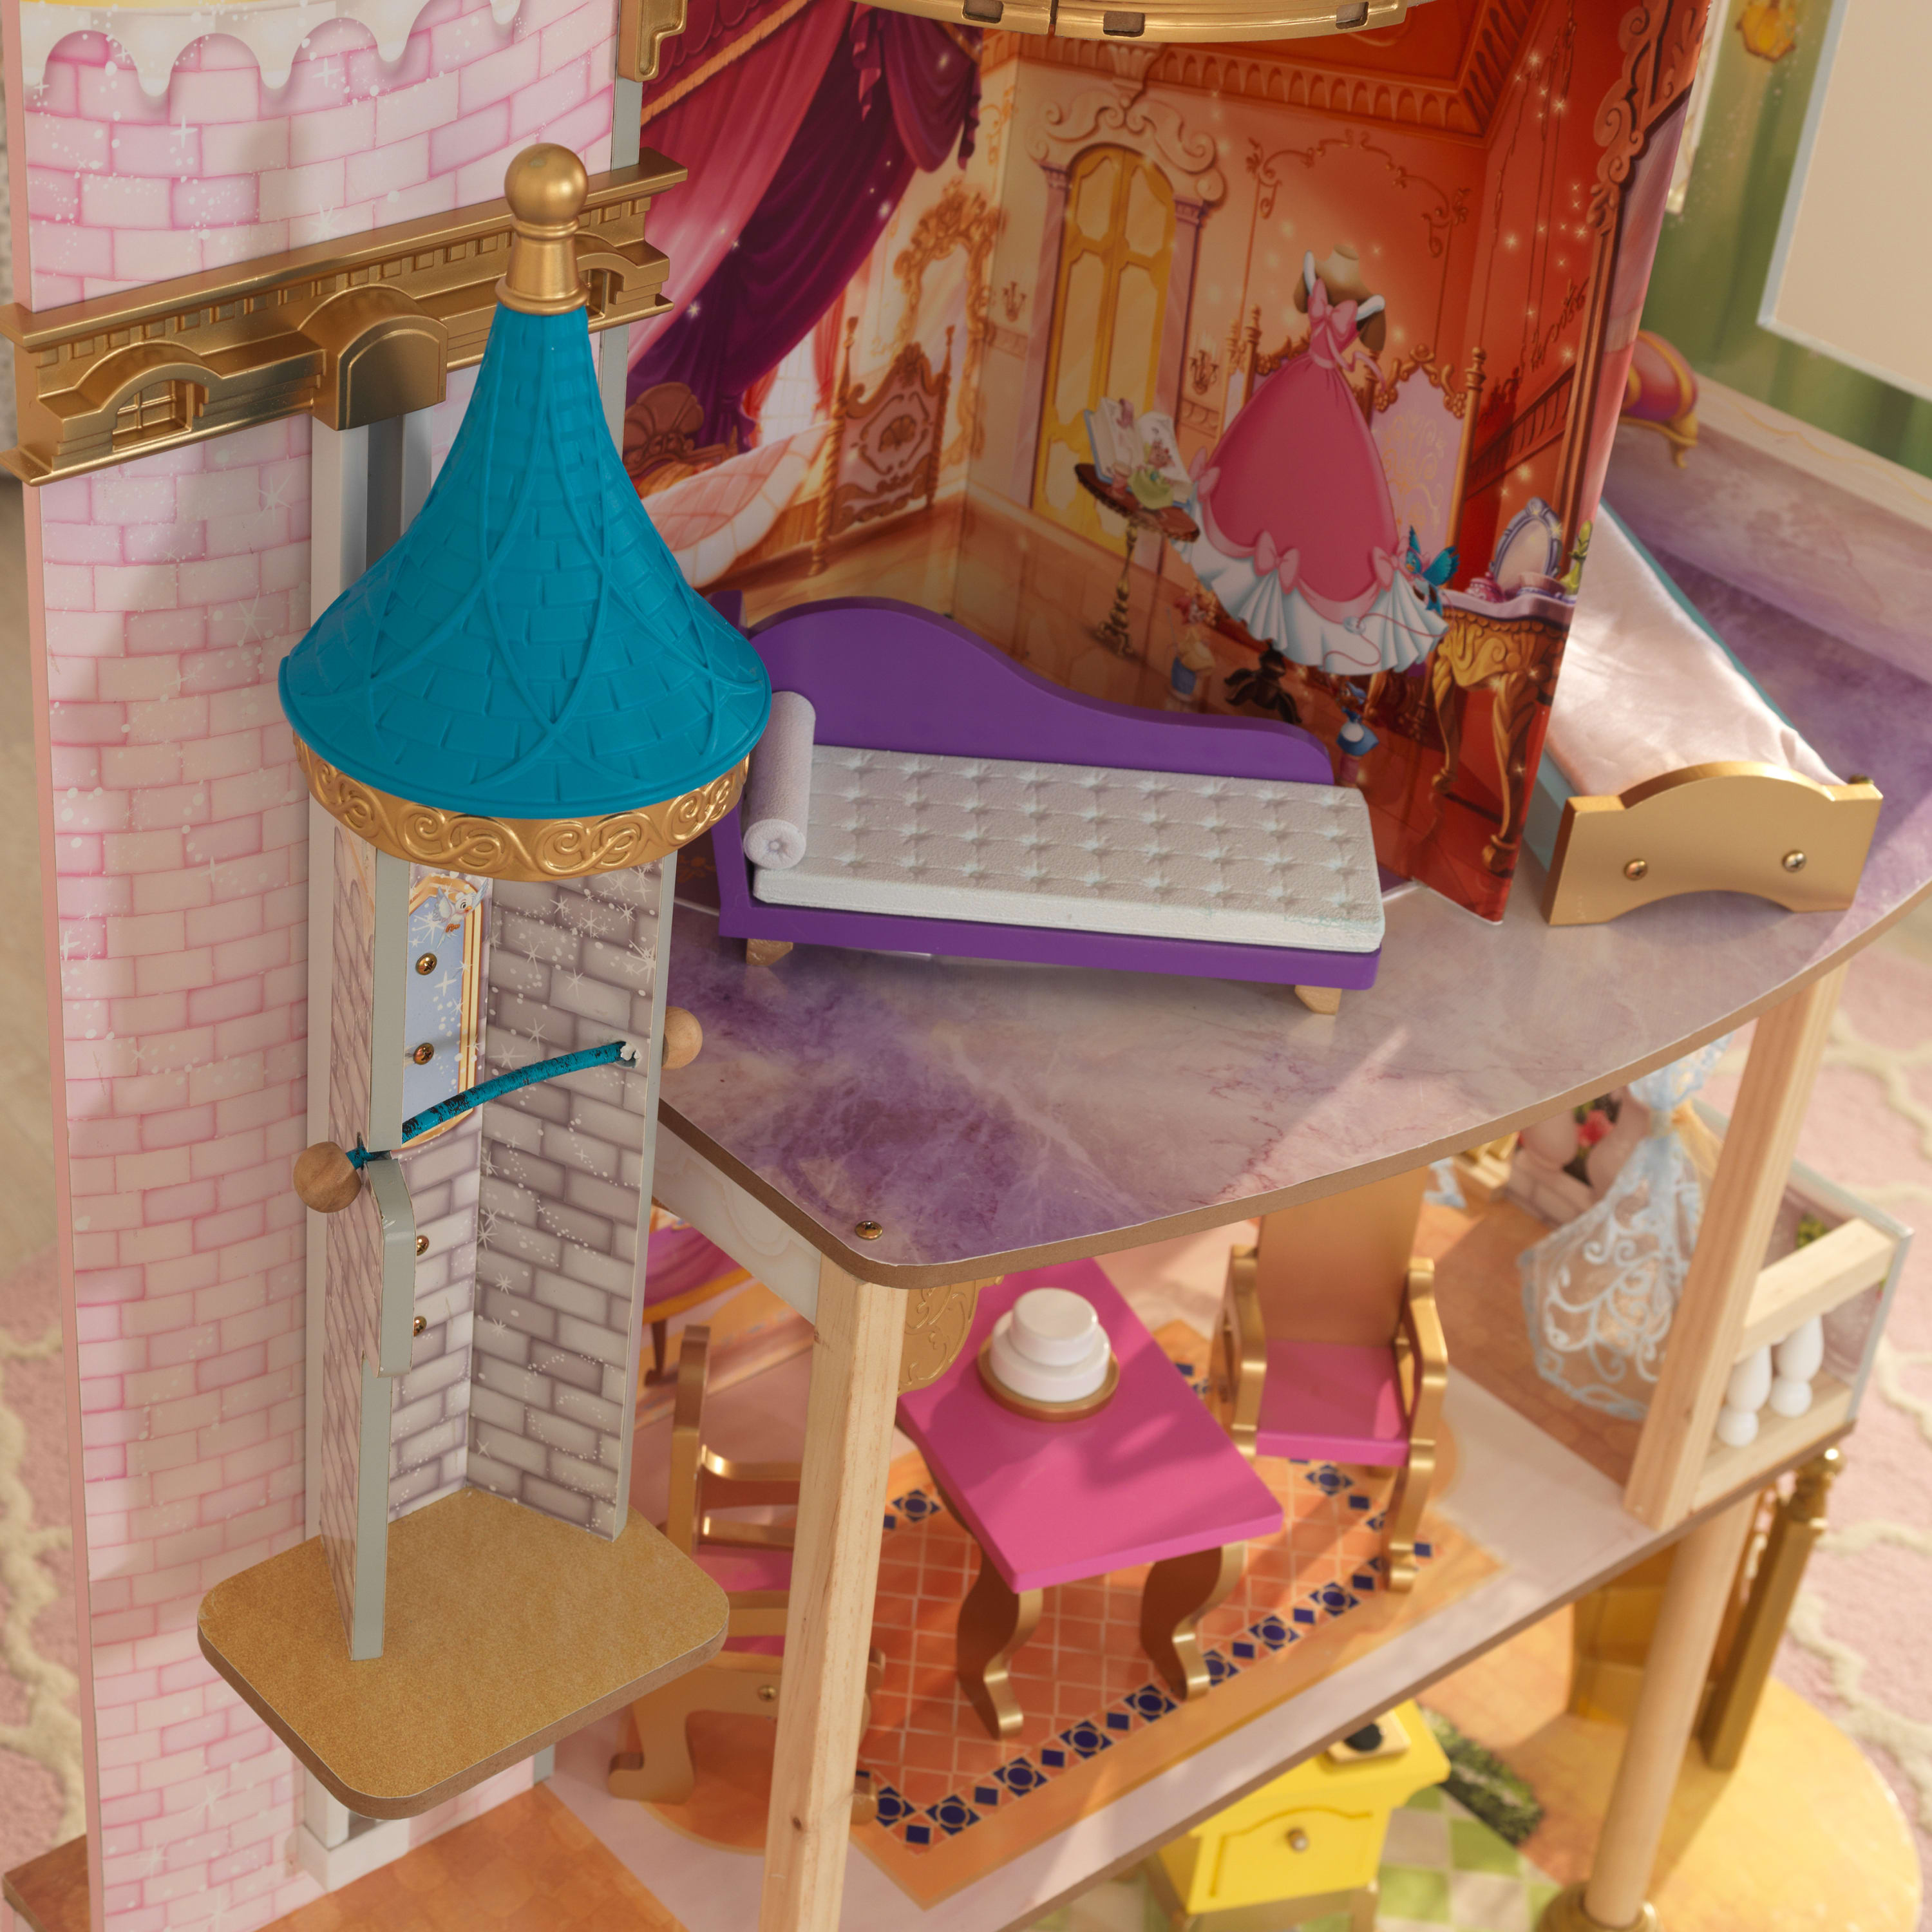 KidKraft Disney Princess Royal Celebration Wooden Castle Dollhouse with 10 Accessories - image 5 of 10